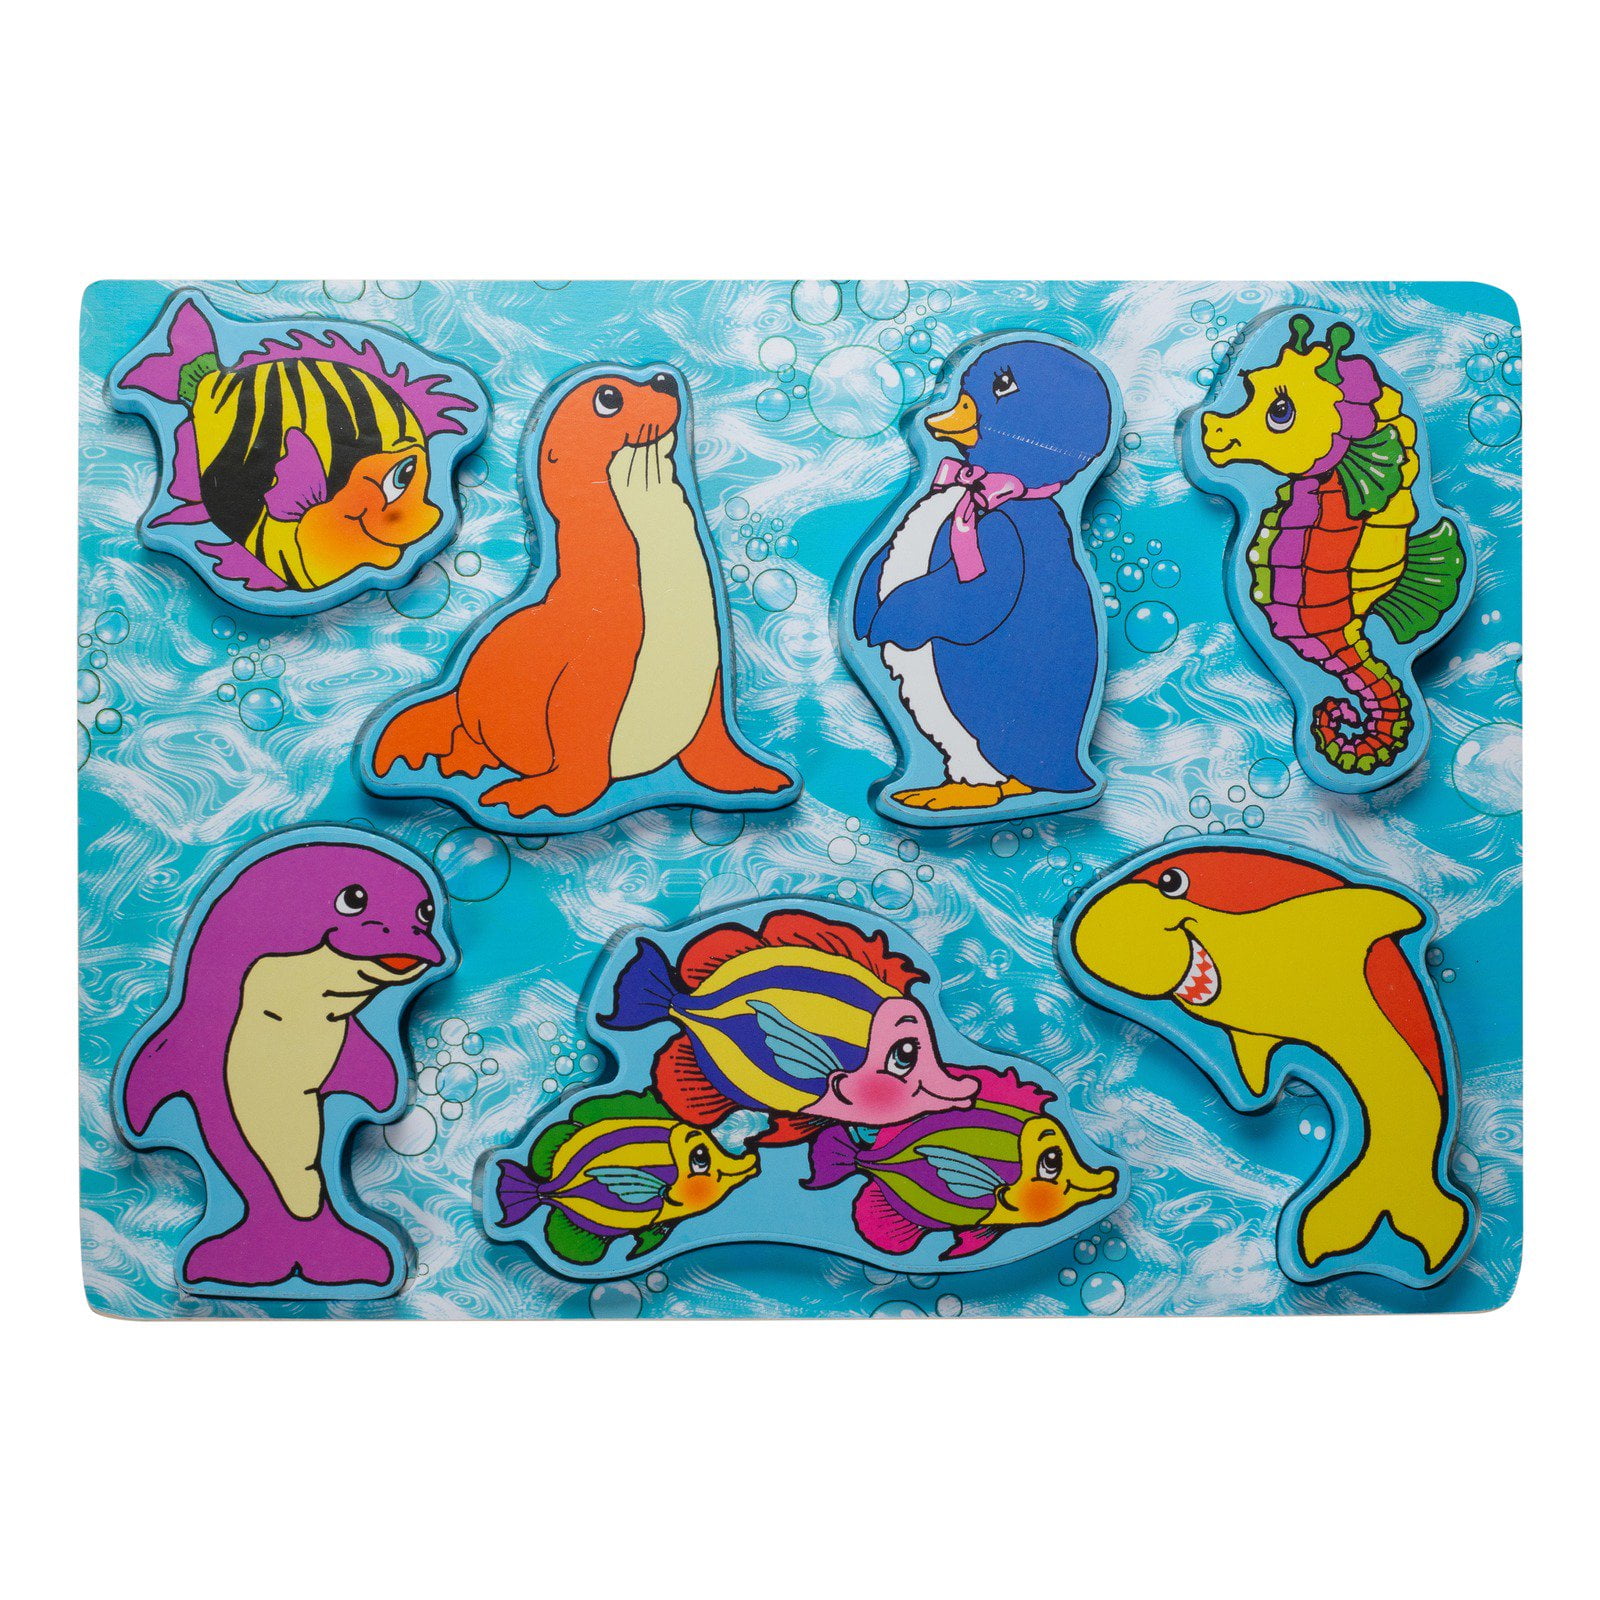 Eliiti Wooden Dinosaurs Chunky Puzzle for Toddlers 2 to 4 Years Old Boys Girls 